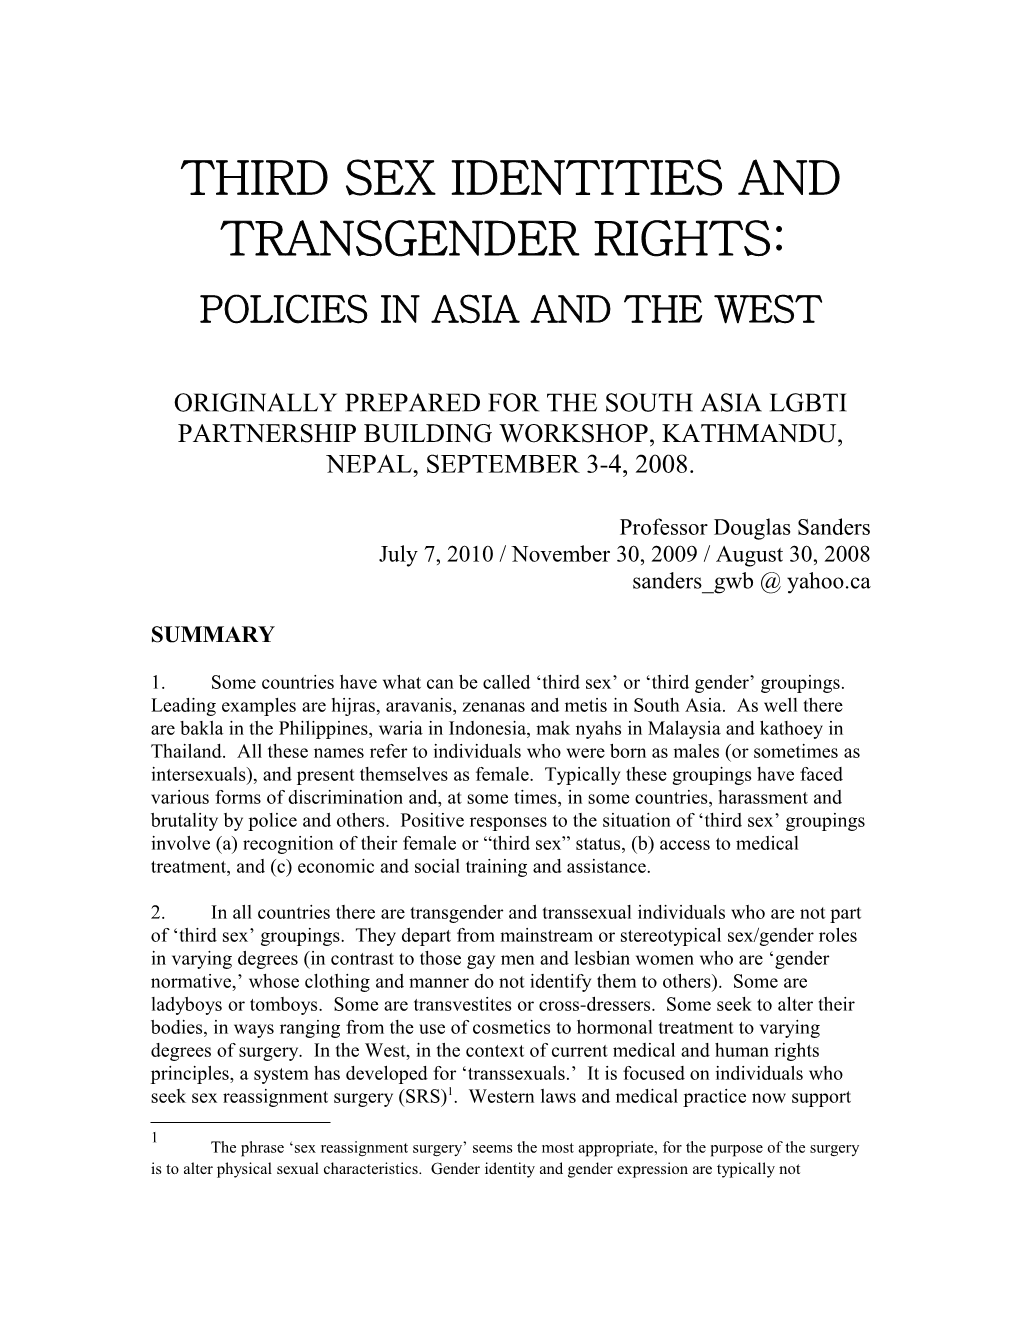 Third Sex Identities and Transgender Rights